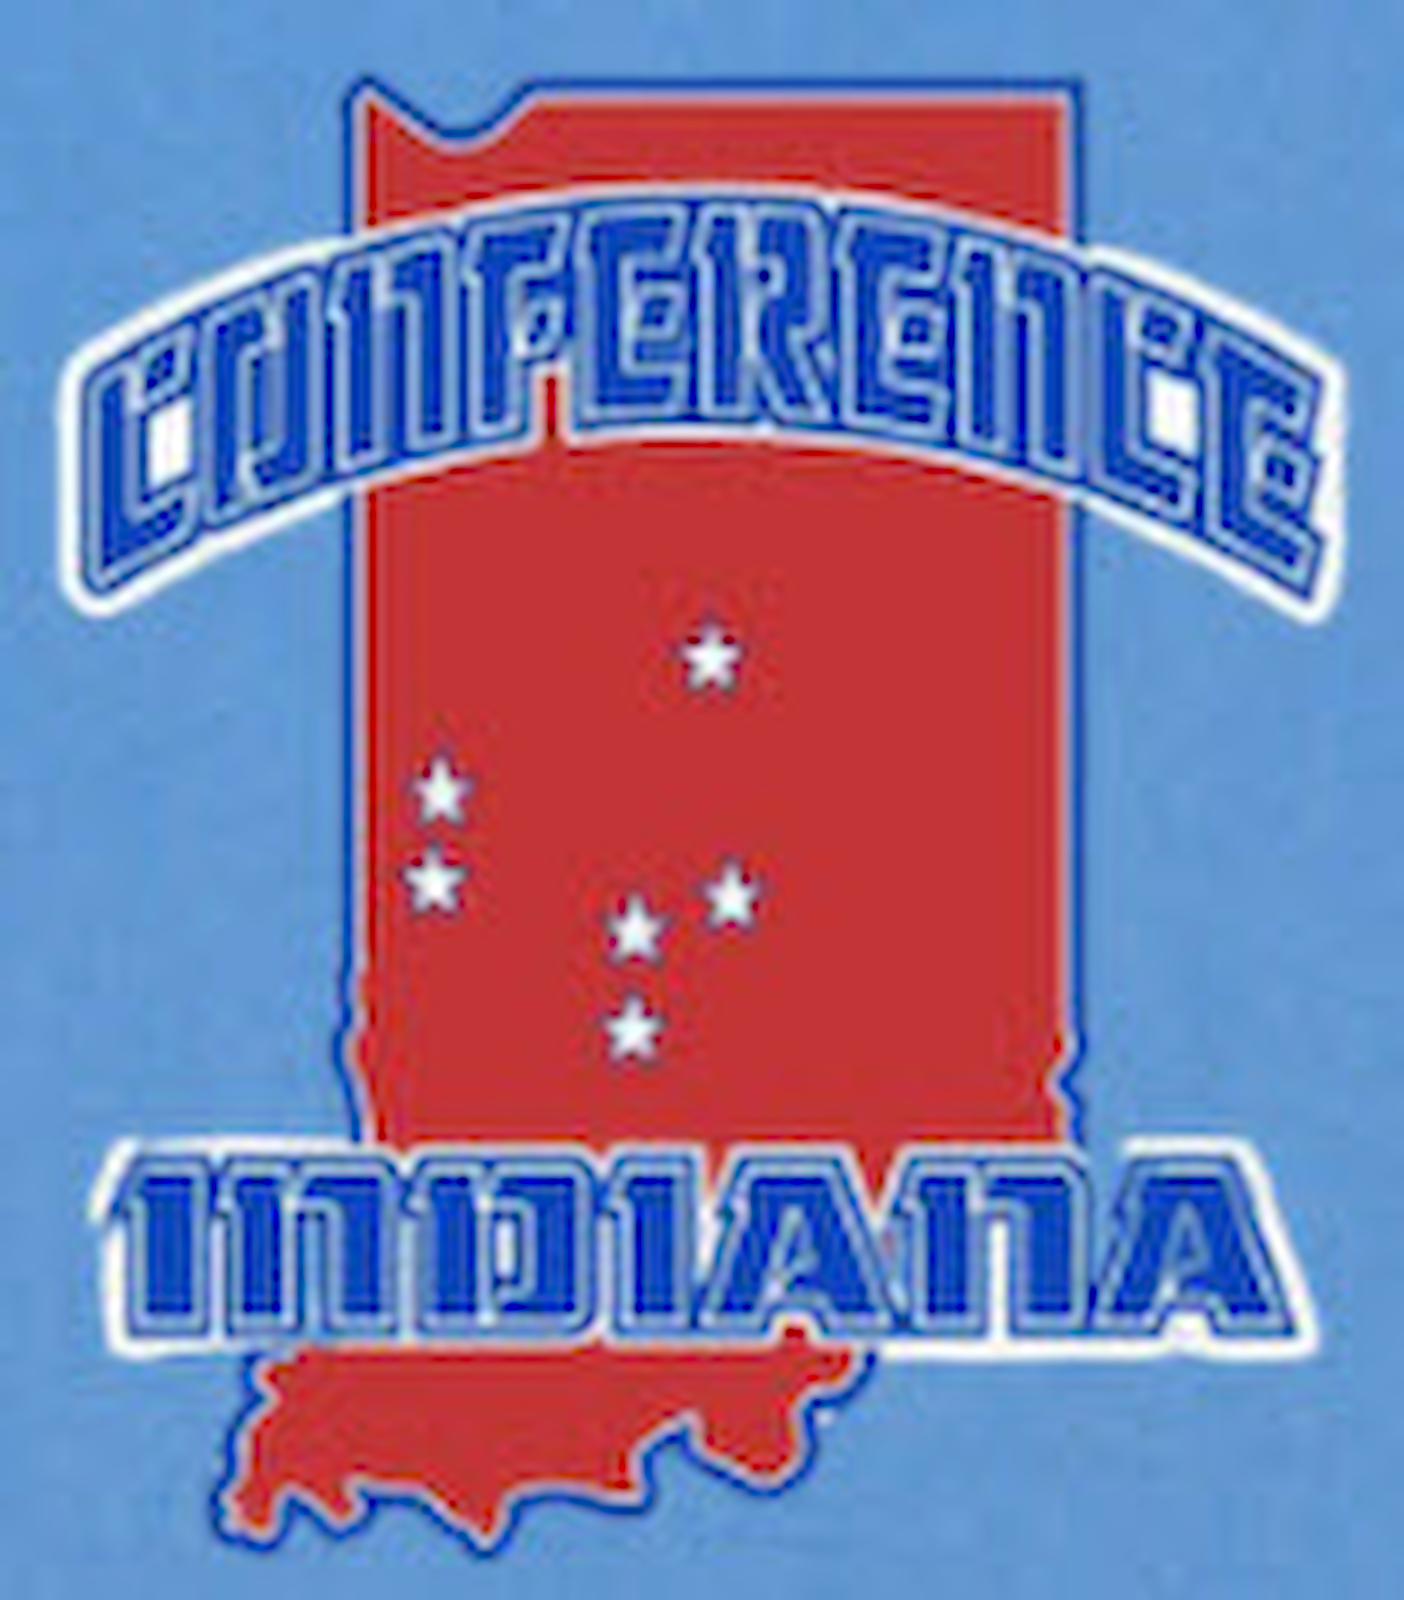 Conference Indiana announces All-Conference selections for fall sports season cover photo